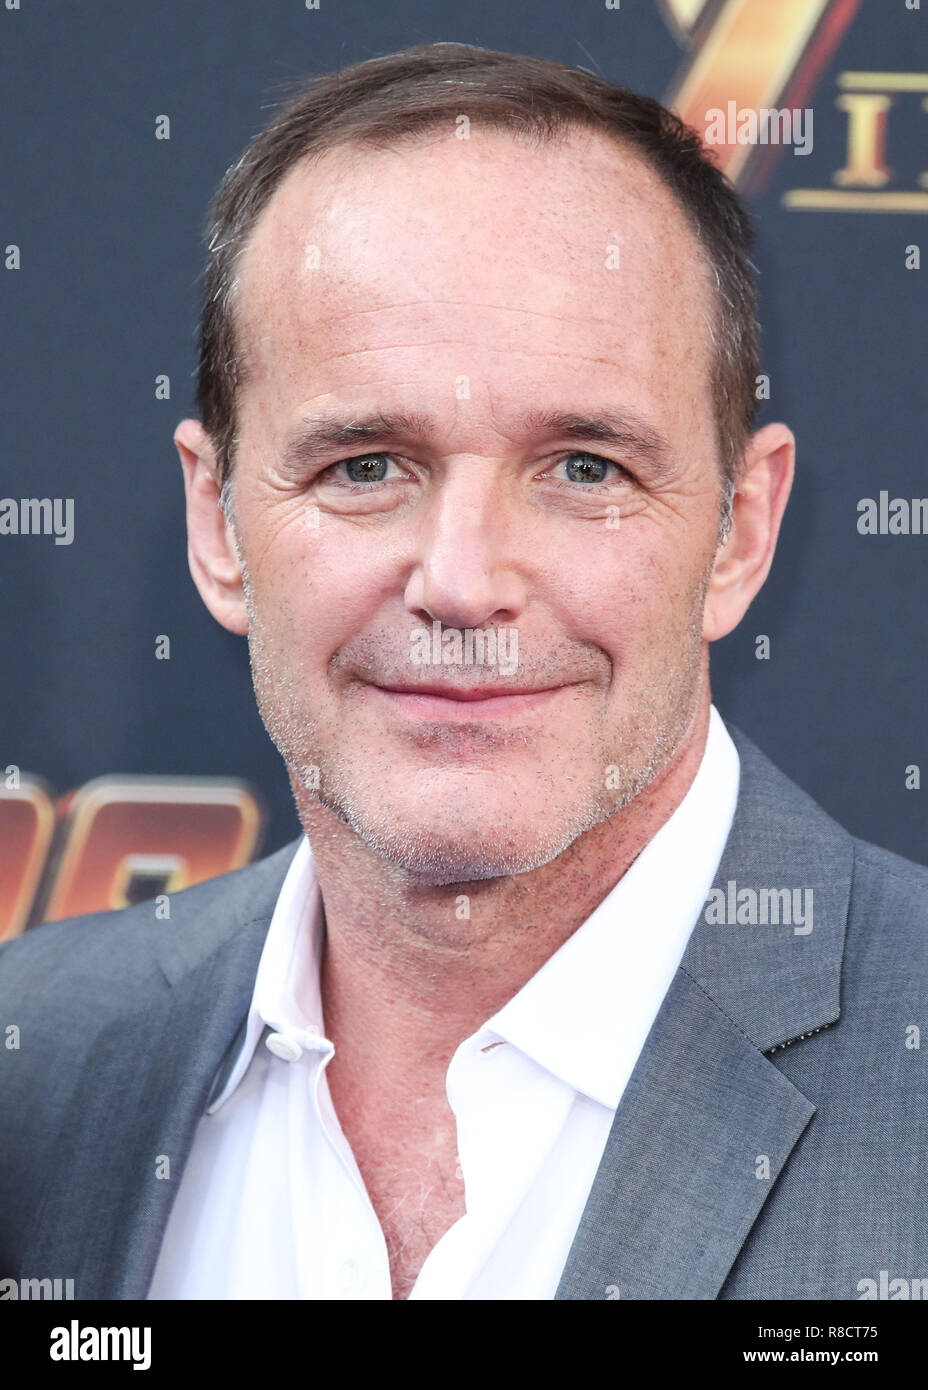 HOLLYWOOD, LOS ANGELES, CA, USA - APRIL 23: Clark Gregg at the World Premiere Of Disney And Marvel's 'Avengers: Infinity War' held at the El Capitan Theatre, Dolby Theatre and TCL Chinese Theatre IMAX on April 23, 2018 in Hollywood, Los Angeles, California, United States. (Photo by Xavier Collin/Image Press Agency) Stock Photo